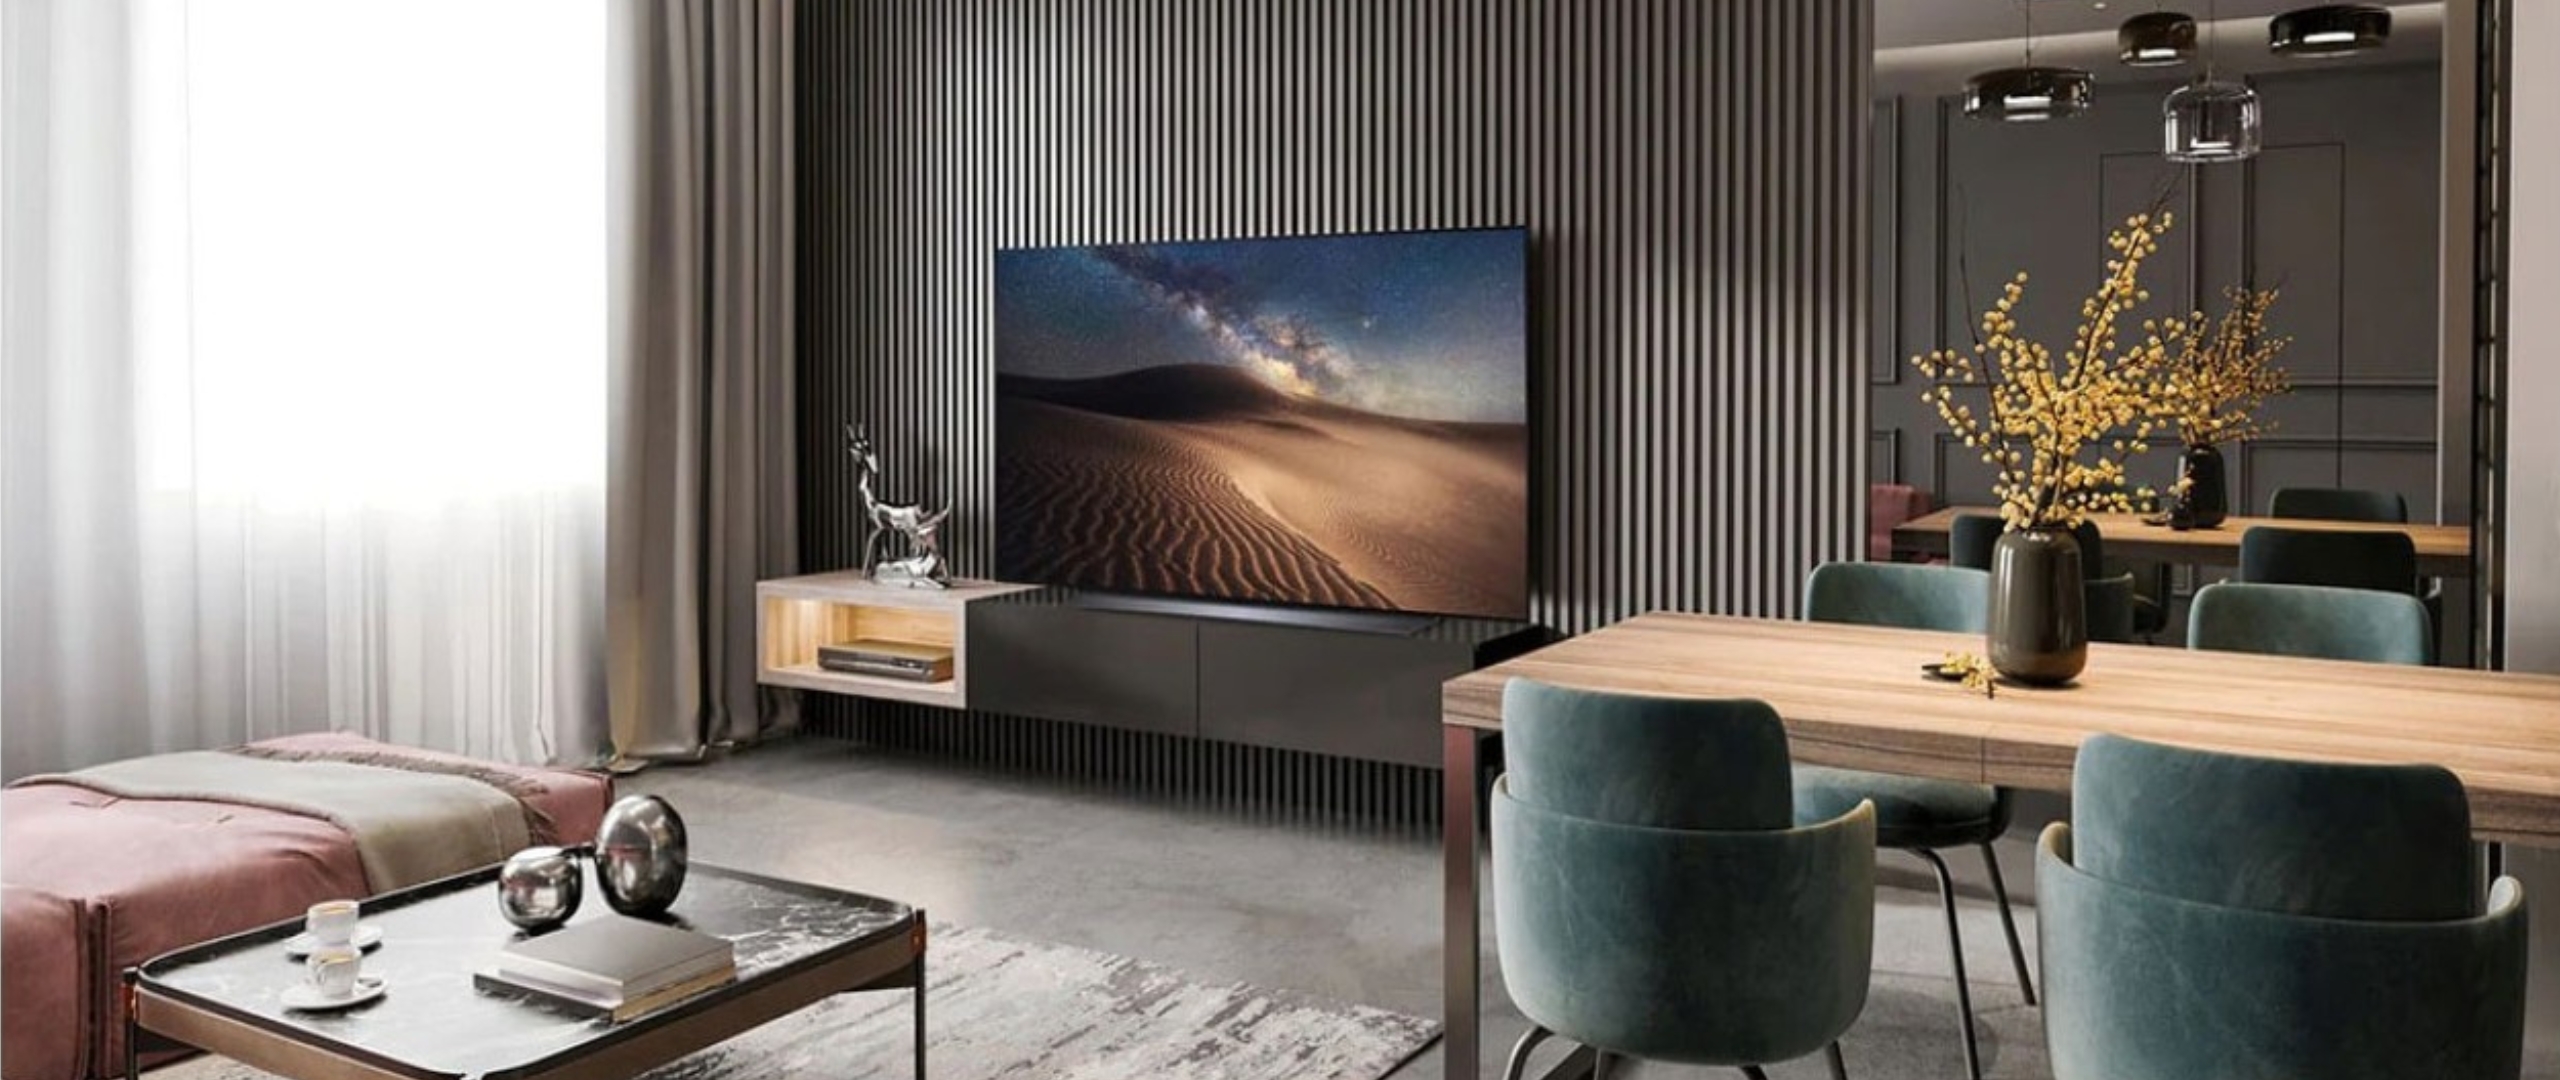 LG C1-series smart TV review: Lush OLED for less green